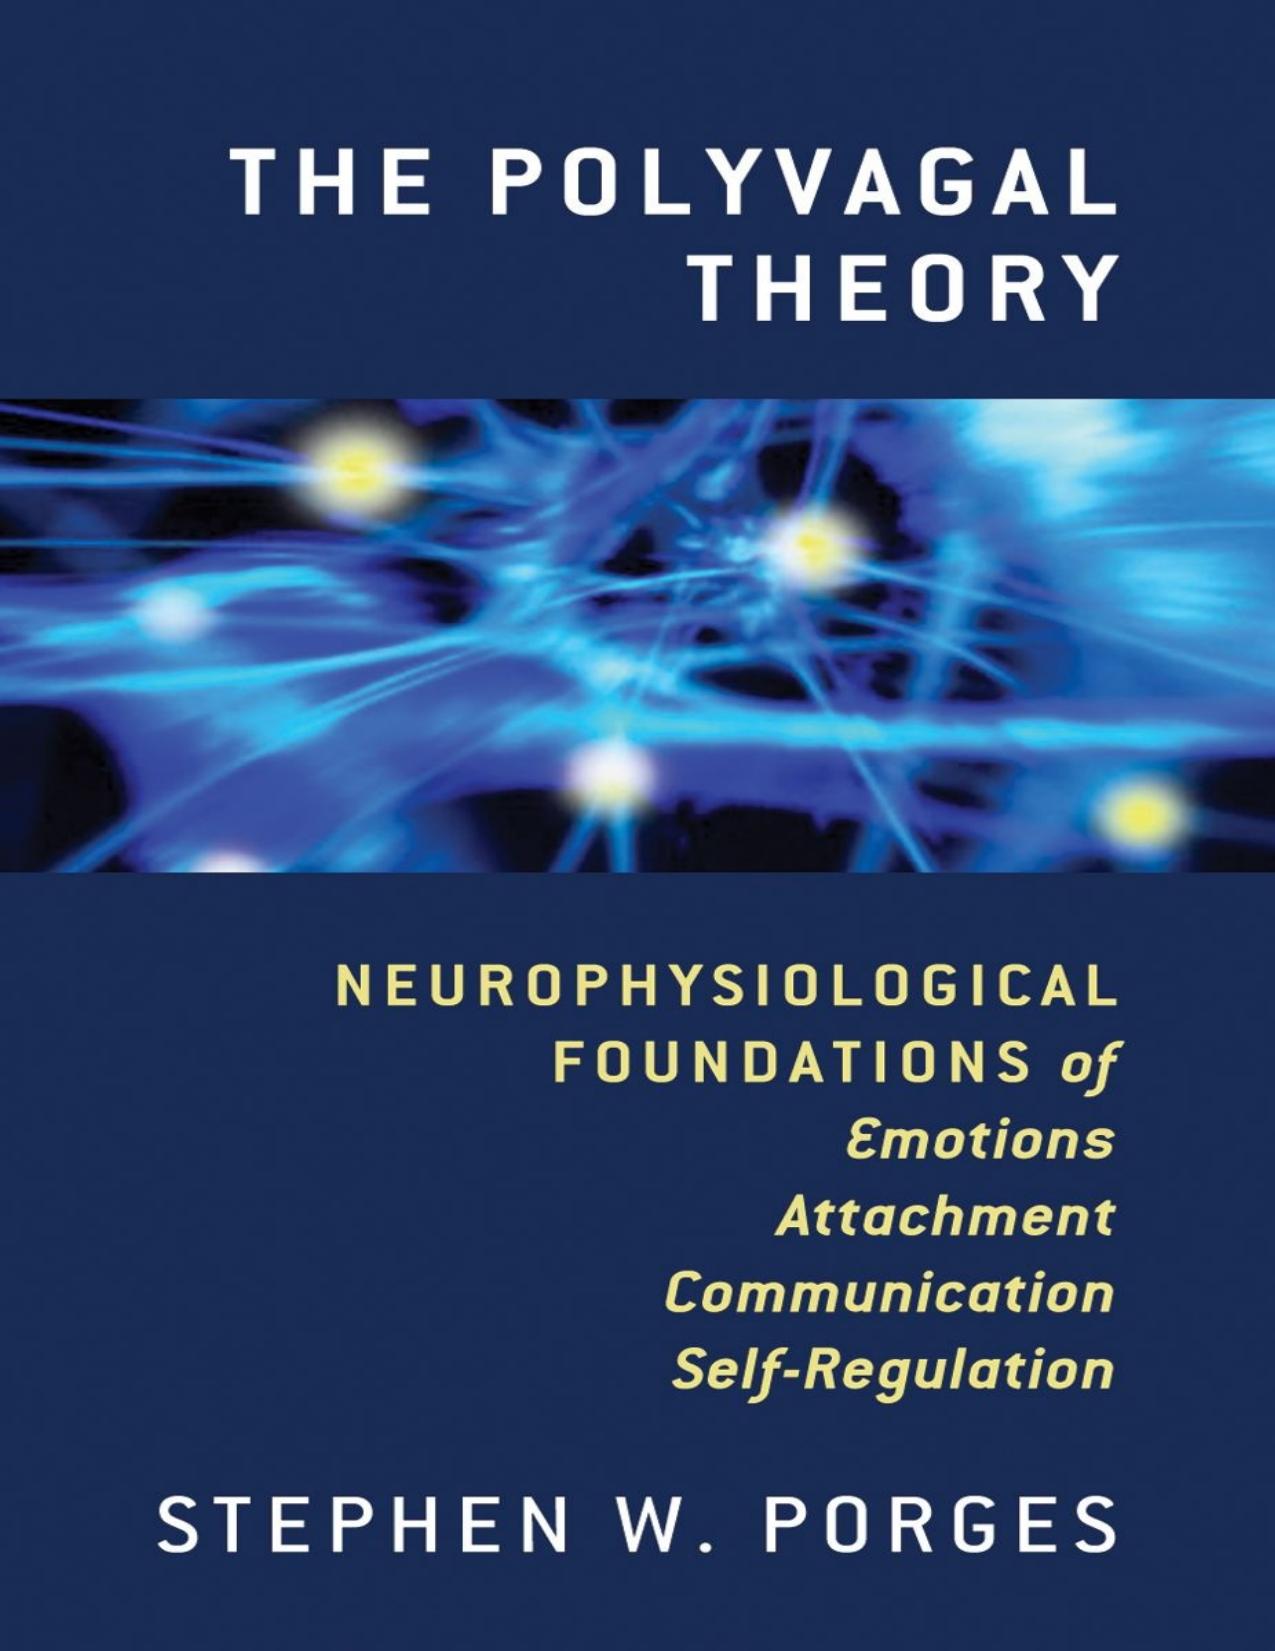 The Polyvagal Theory_ Neurophysiological Foundations of Emotions, Attachment, Communication, and Self-Regulation ( PDFDrive.com ).pdf